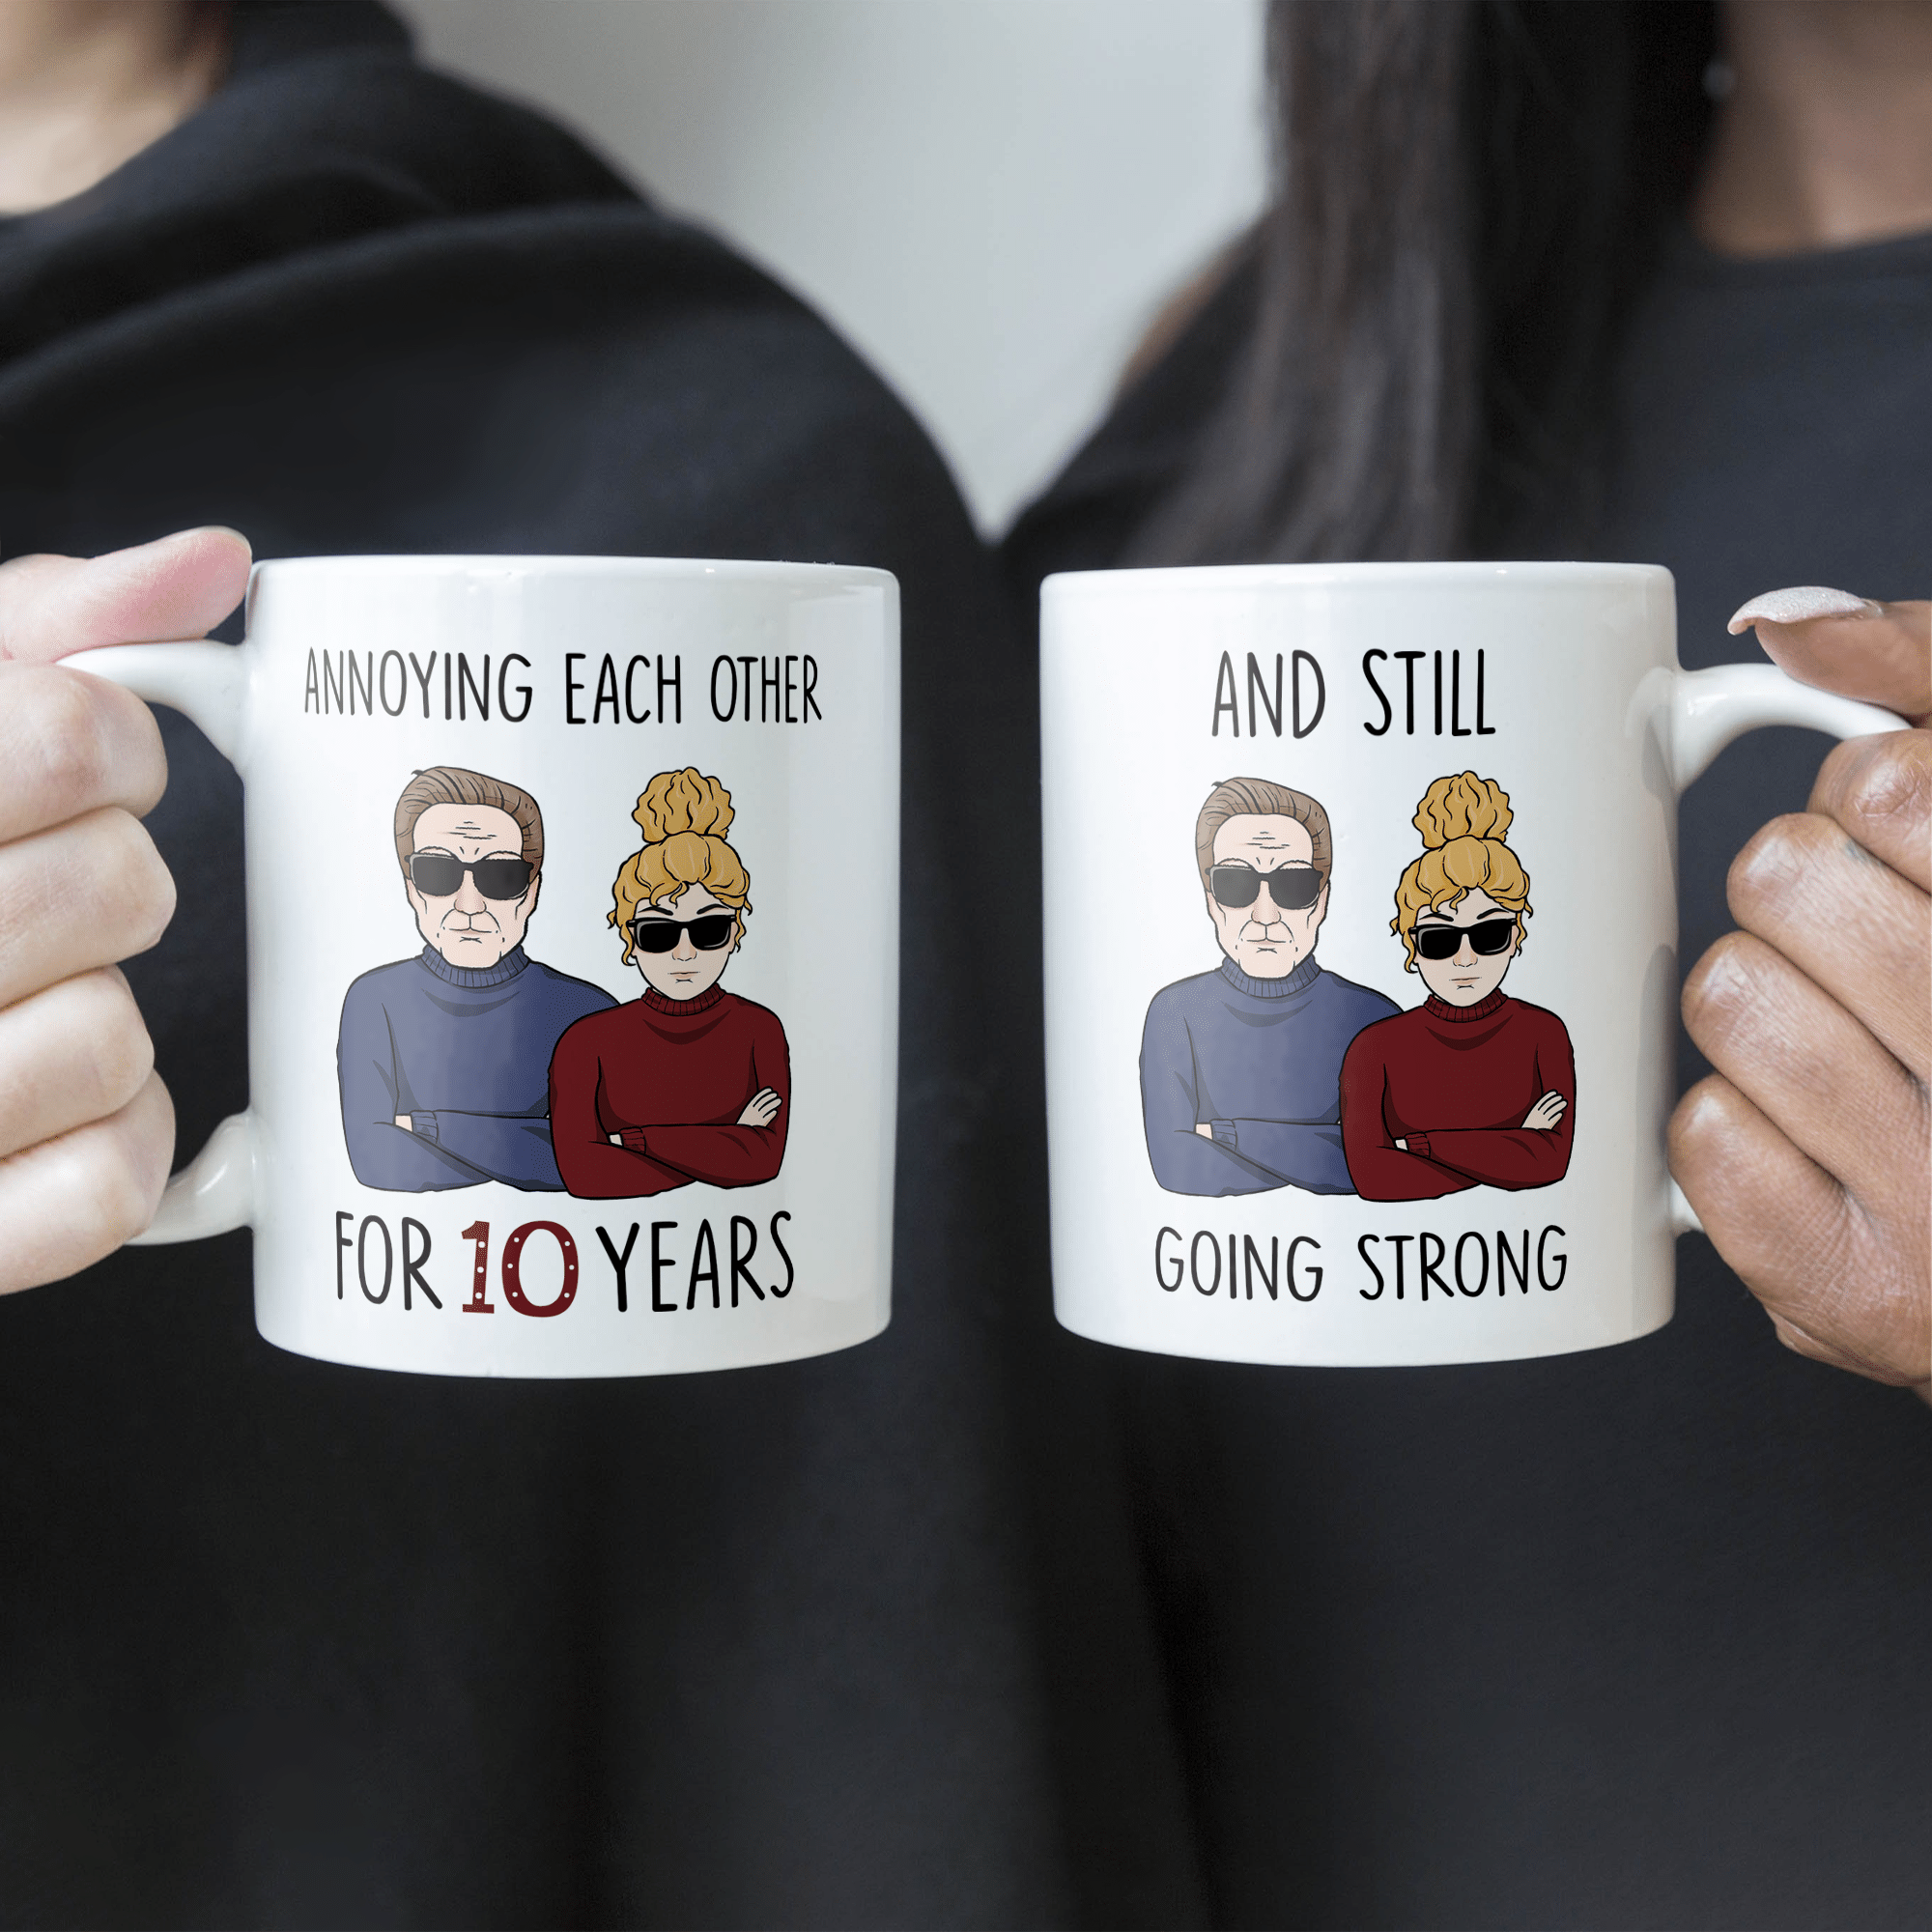 Annoying Each Other - Personalized Mug - Valentine's Day, Anniversary Gift For Couple, Husband & Wife